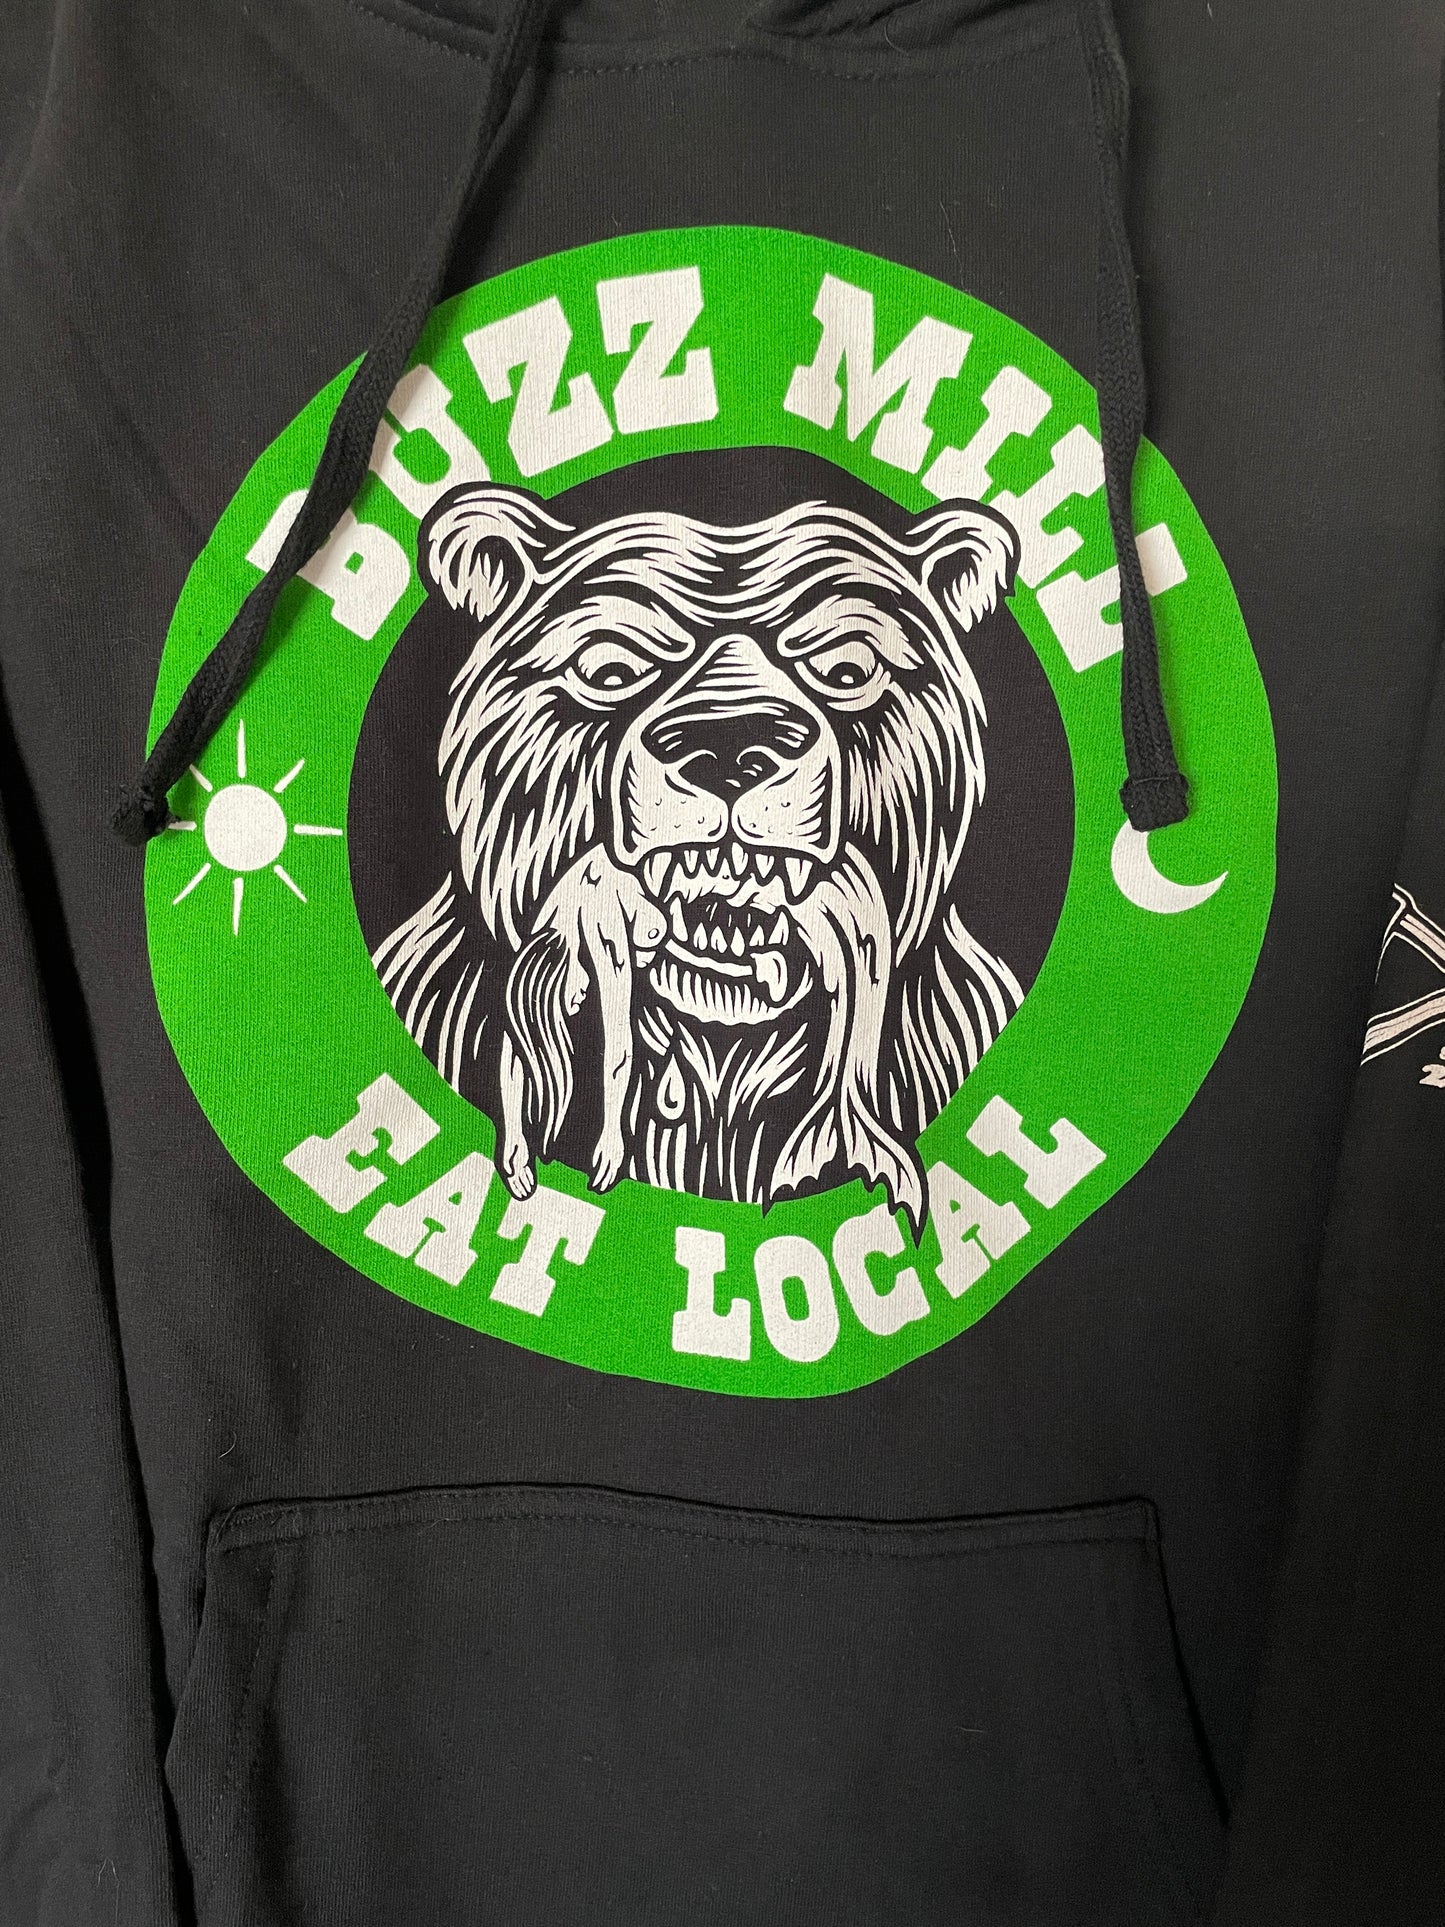 Buzzmill eat local pullover sweater